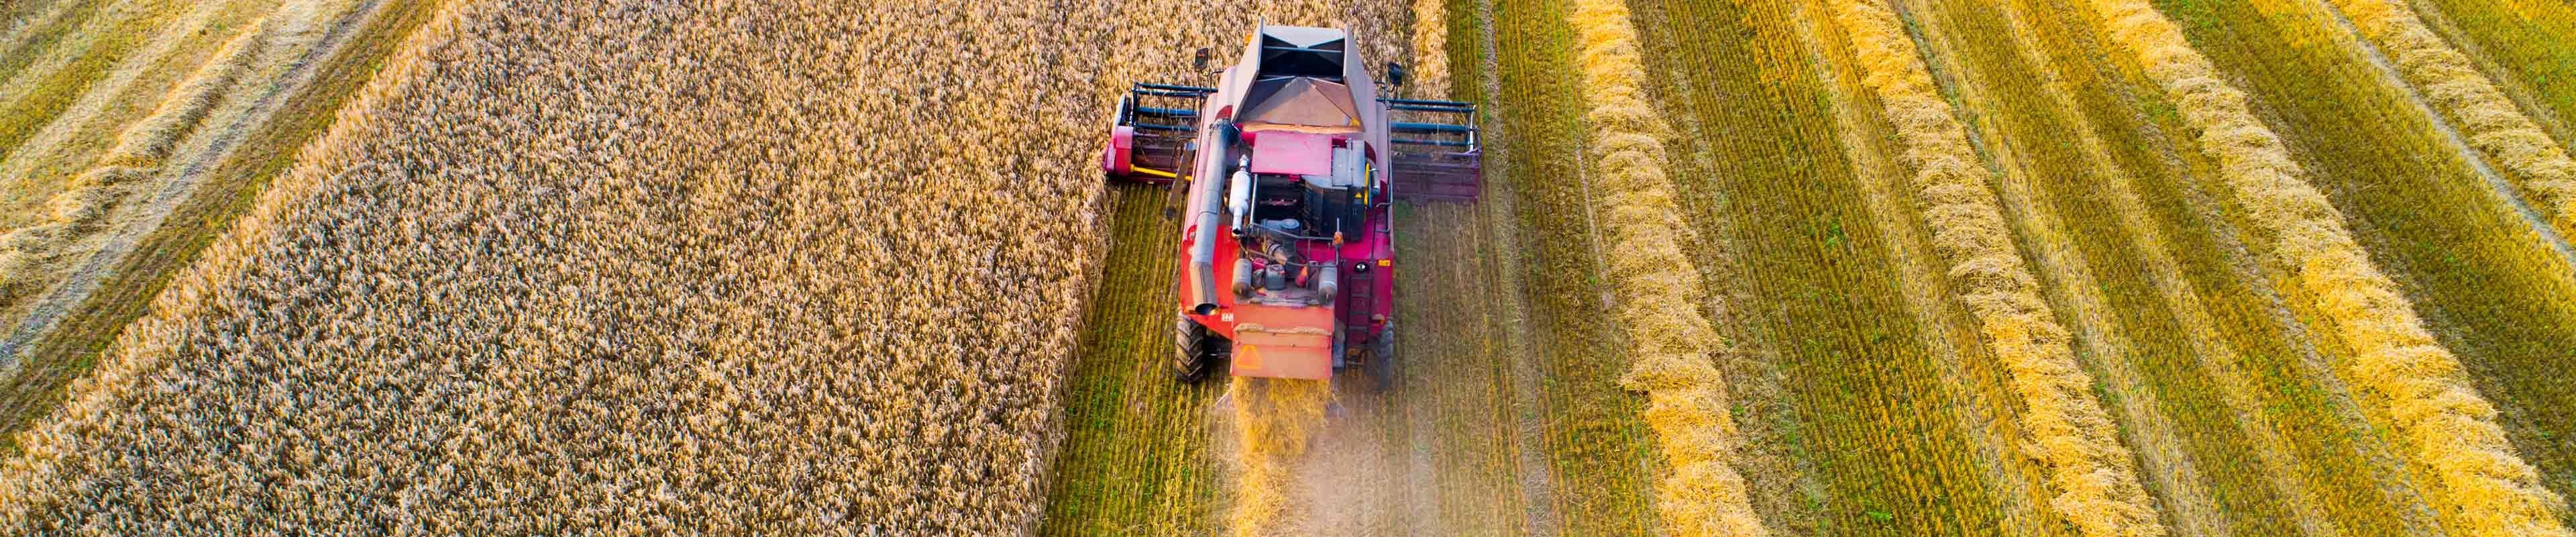 Image of a tractor harvesting a crop.